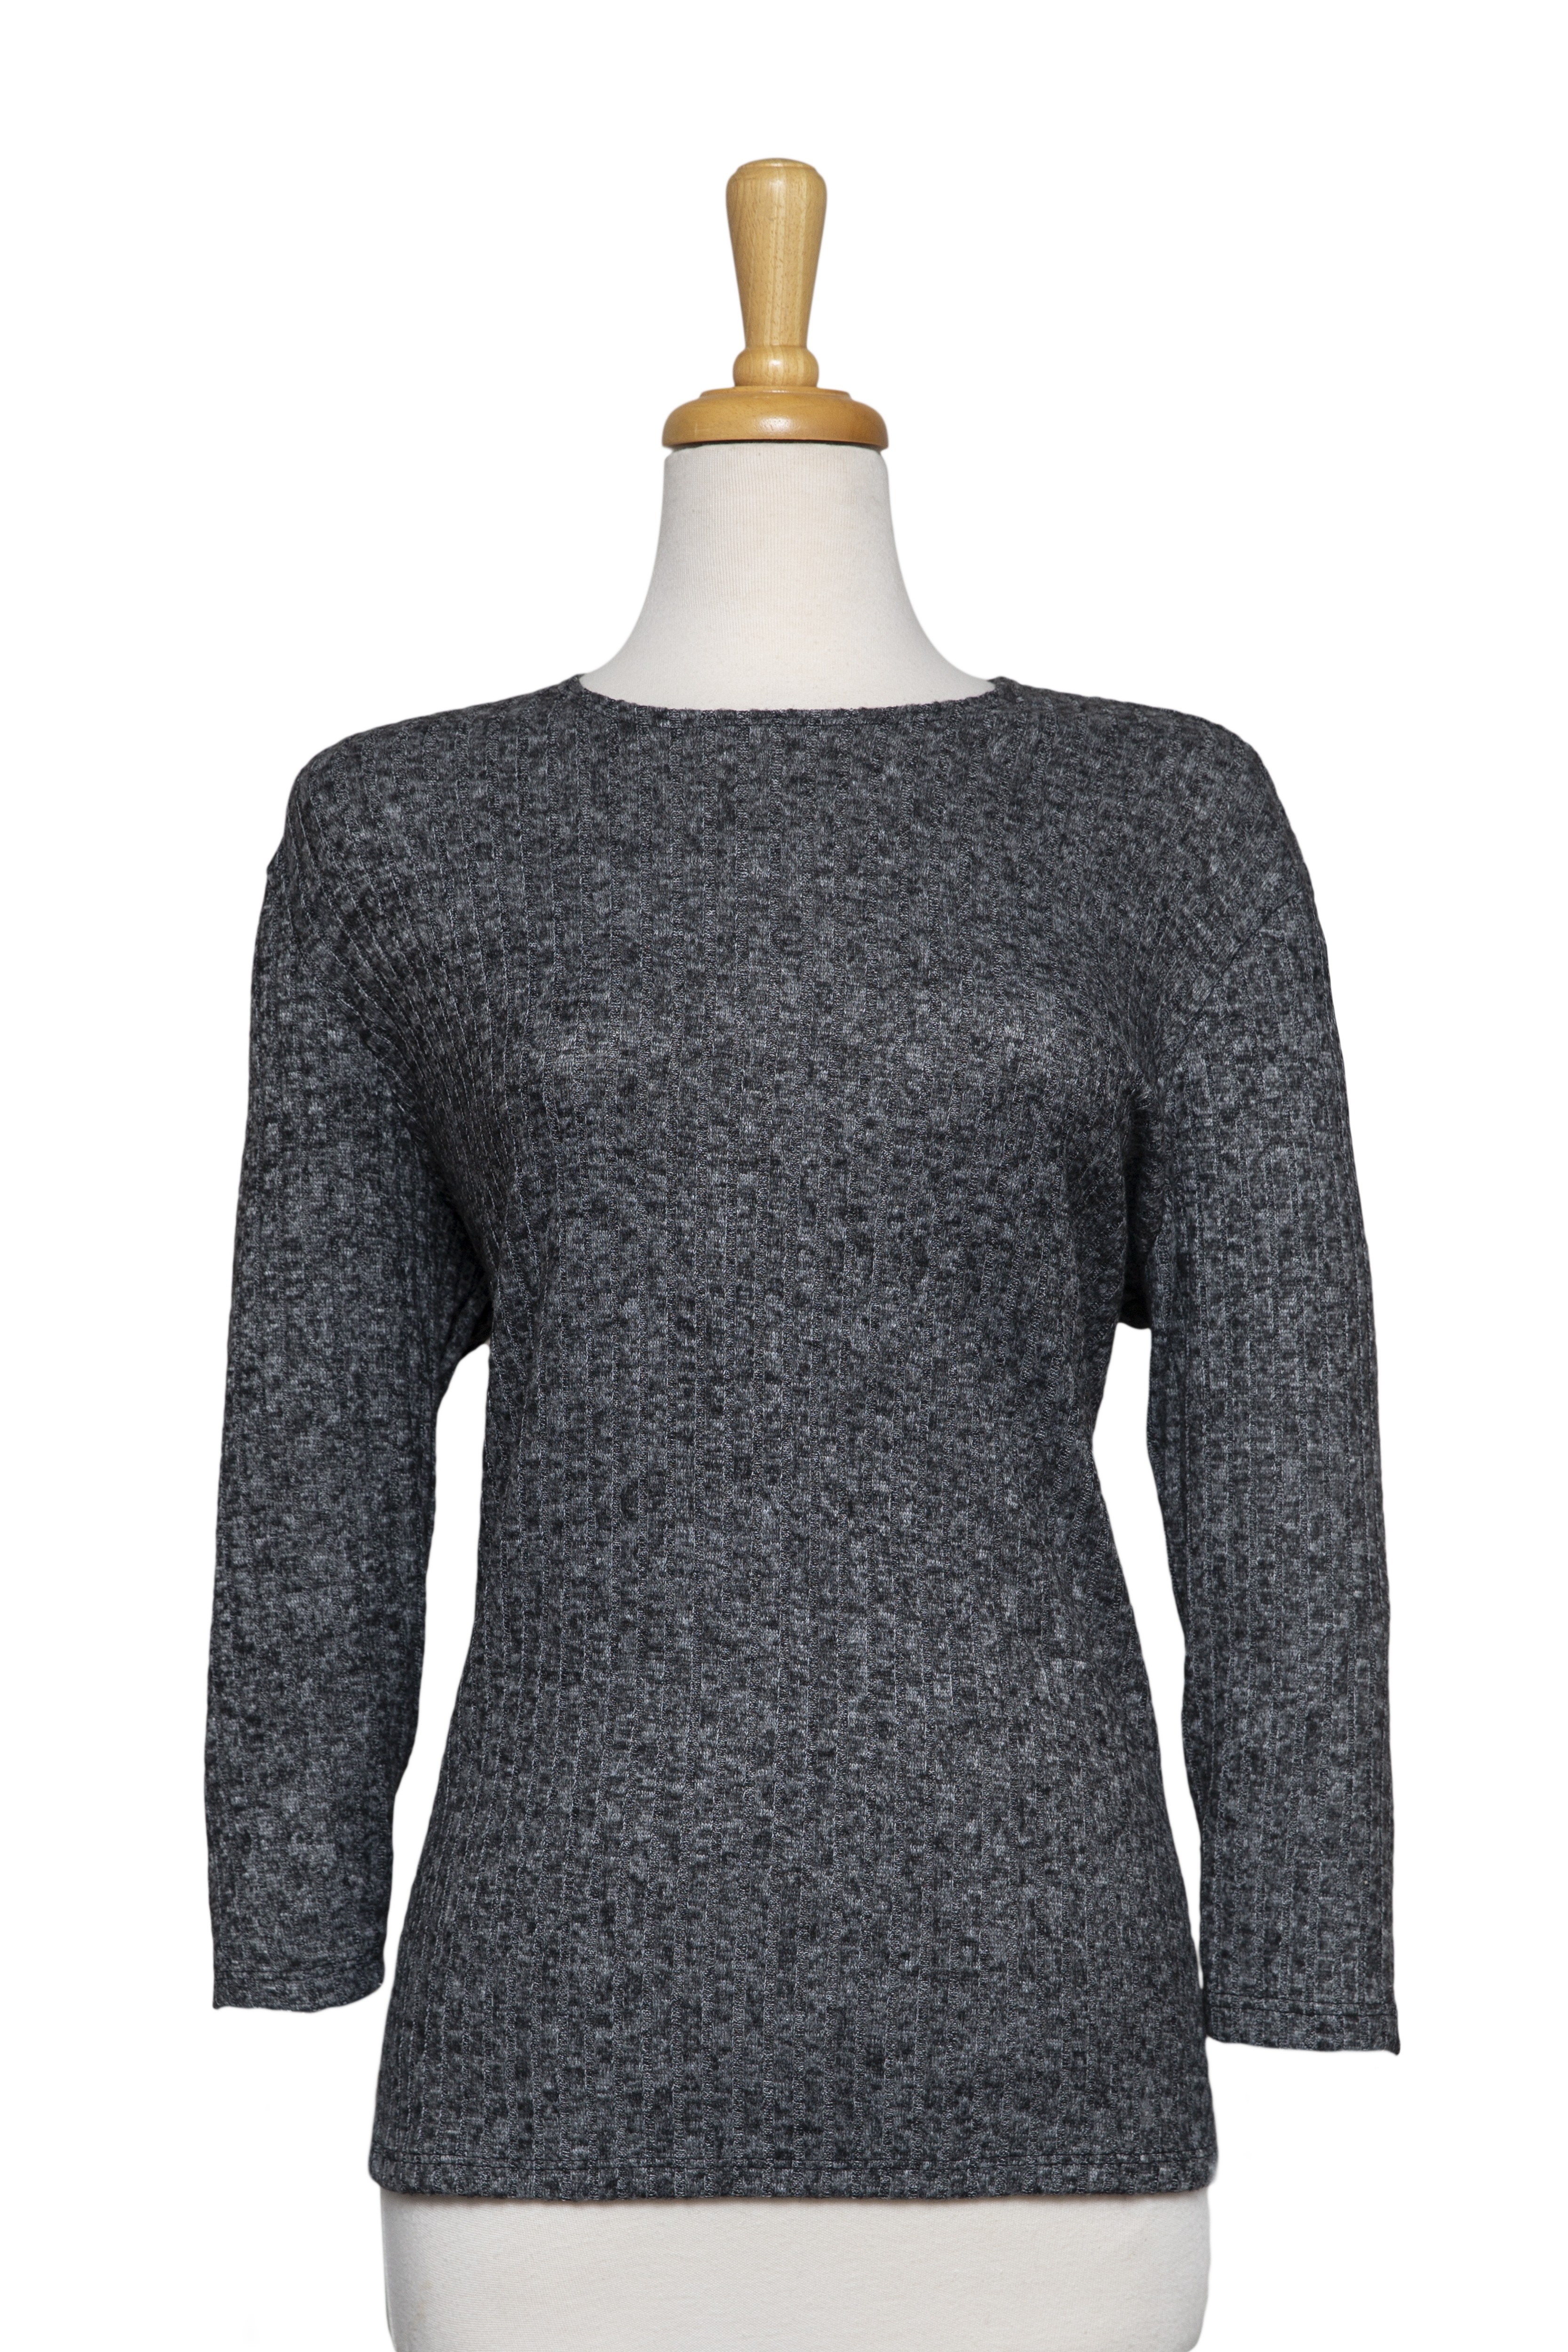 Heather Charcoal Ribbed 3/4 Sleeves Knit Top